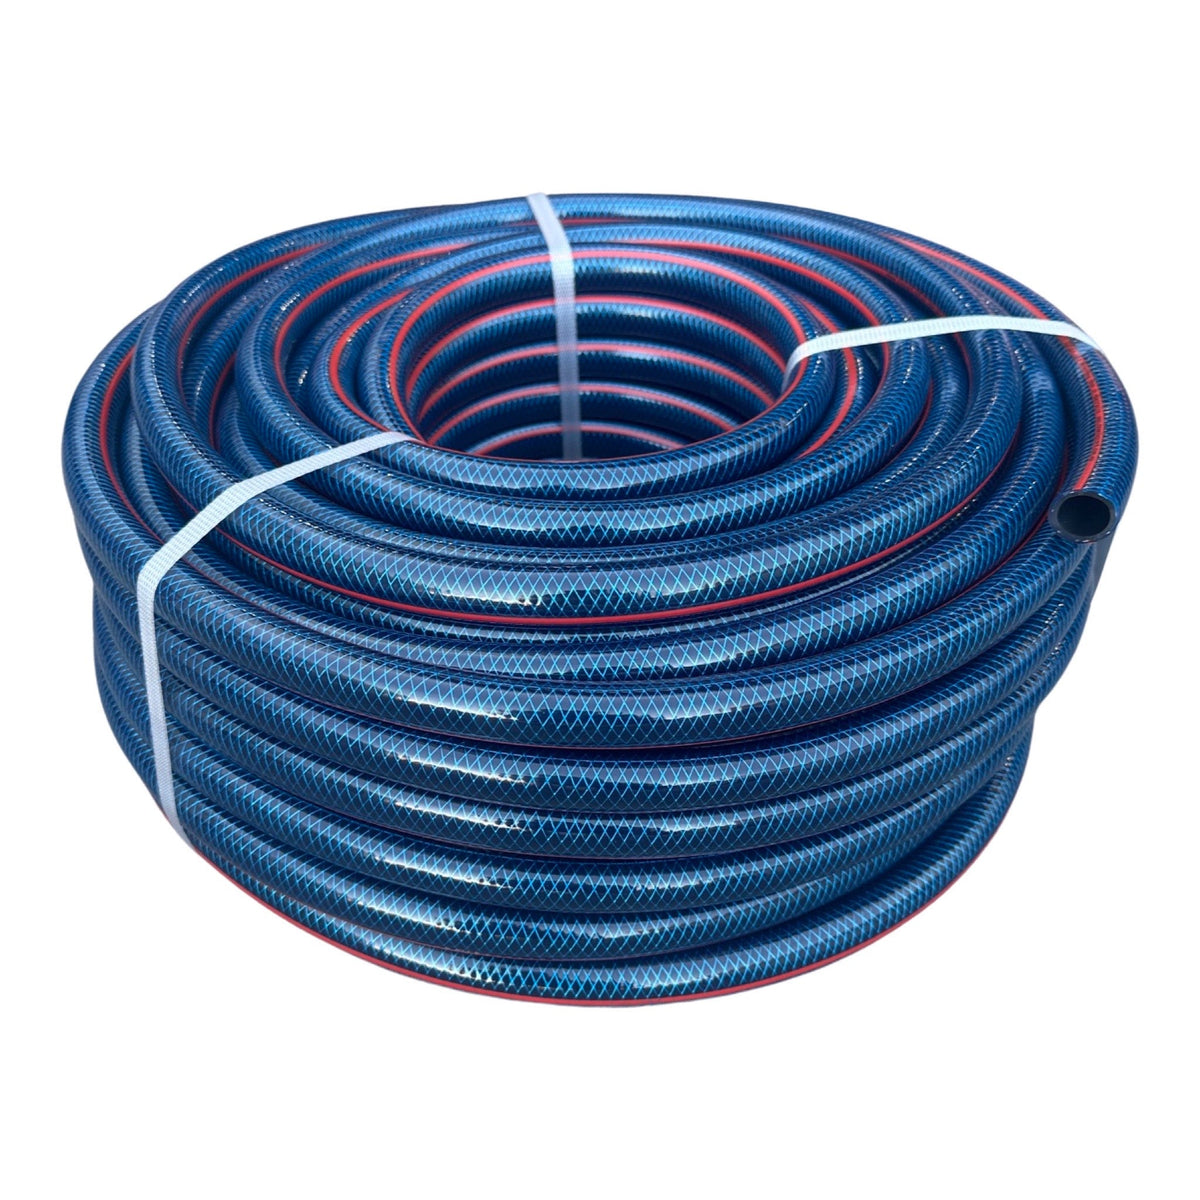 OZFLEX Flexible Garden Water Hose with 3 Piece Plastic Fittings